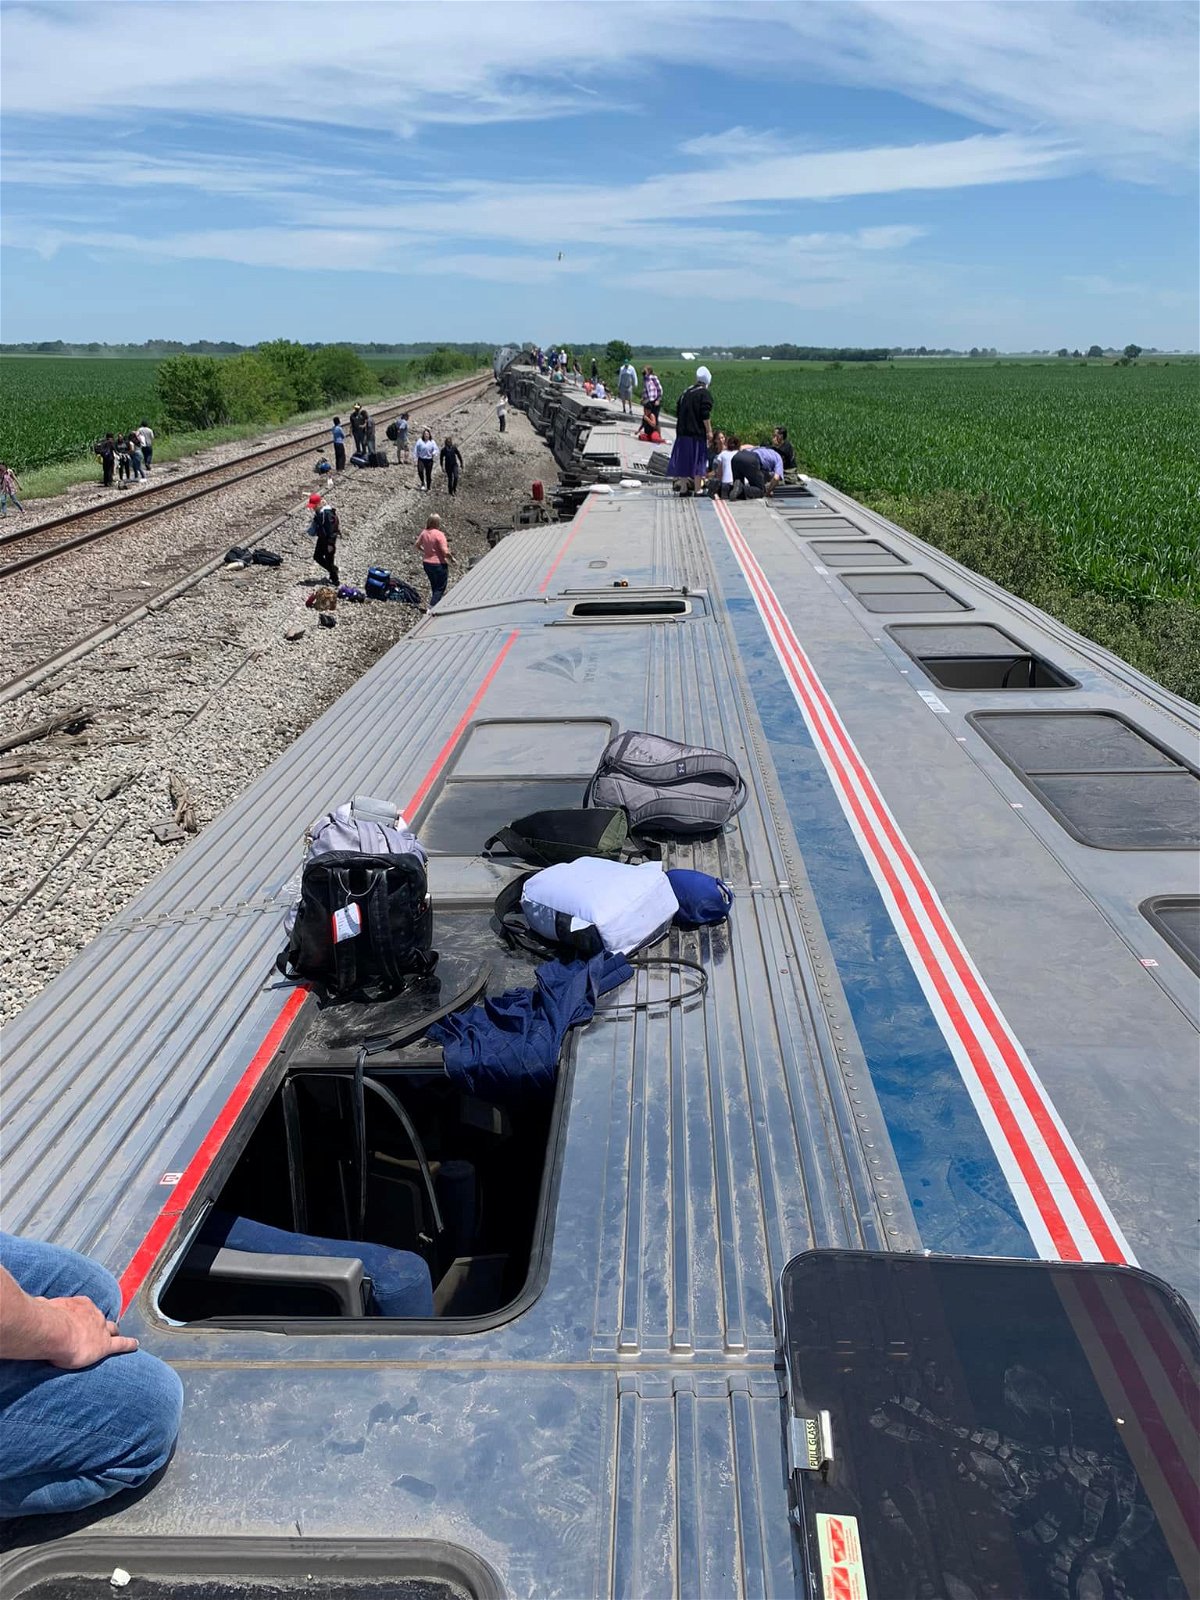 People leave Amtrak train cars after a derailment in Chariton County on Monday, June 27, 2022.